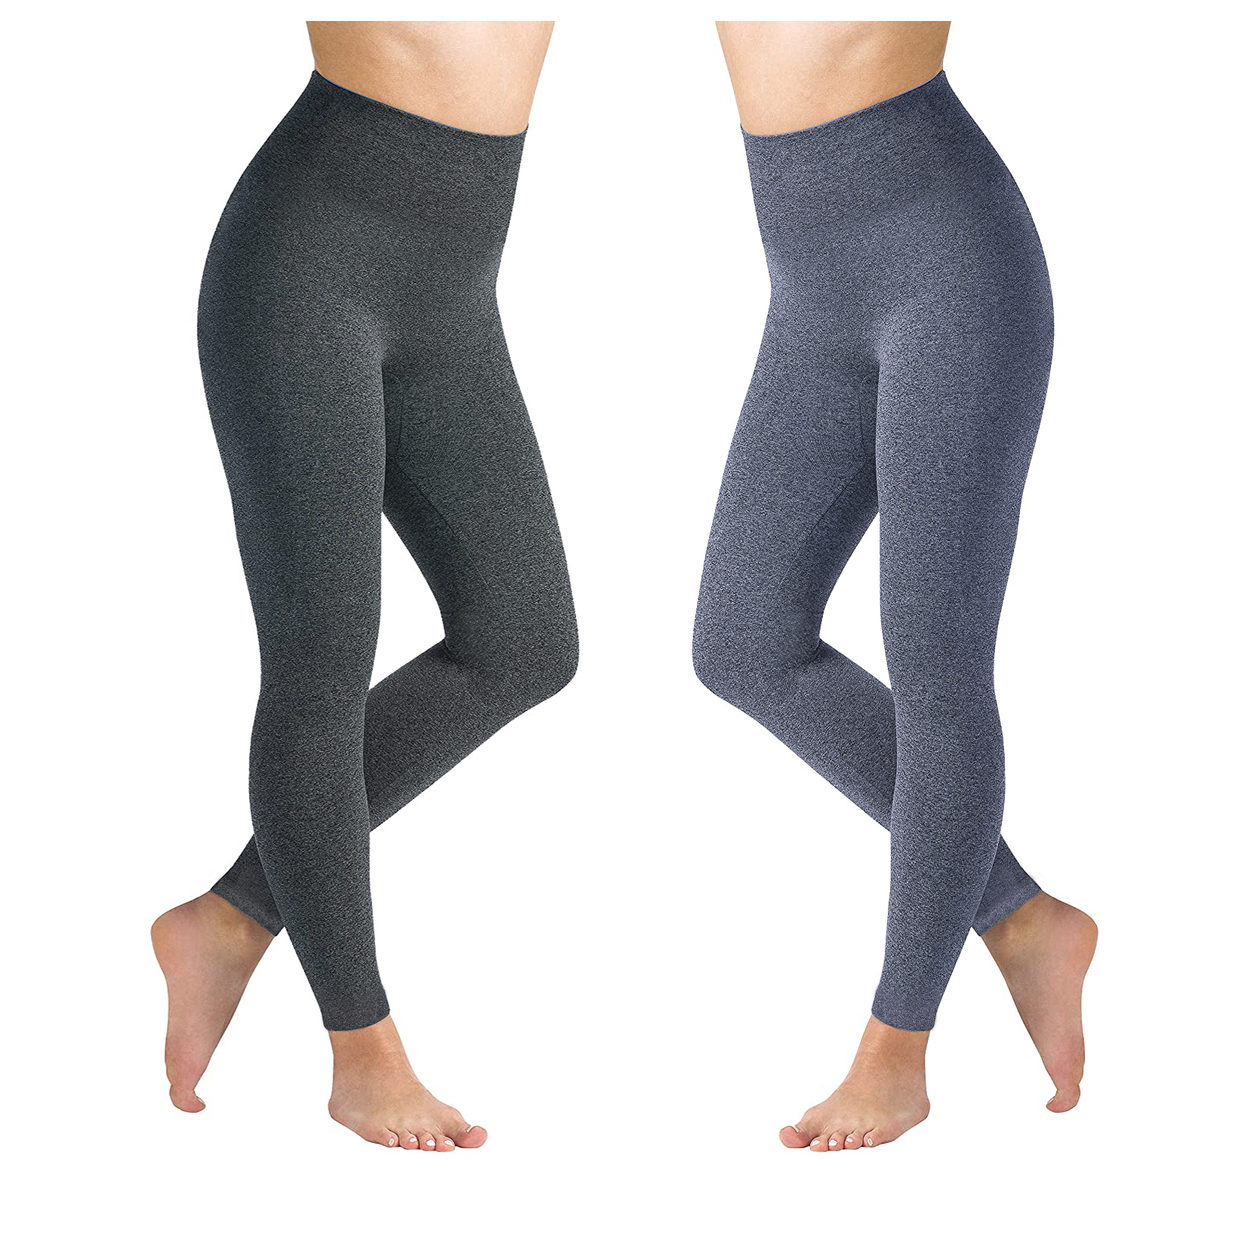 2-Pack: Women's High Waisted Ultra Soft Fleece Lined Warm Marled Leggings(Available In Plus Sizes) - Charcoal & Charcoal, 2x